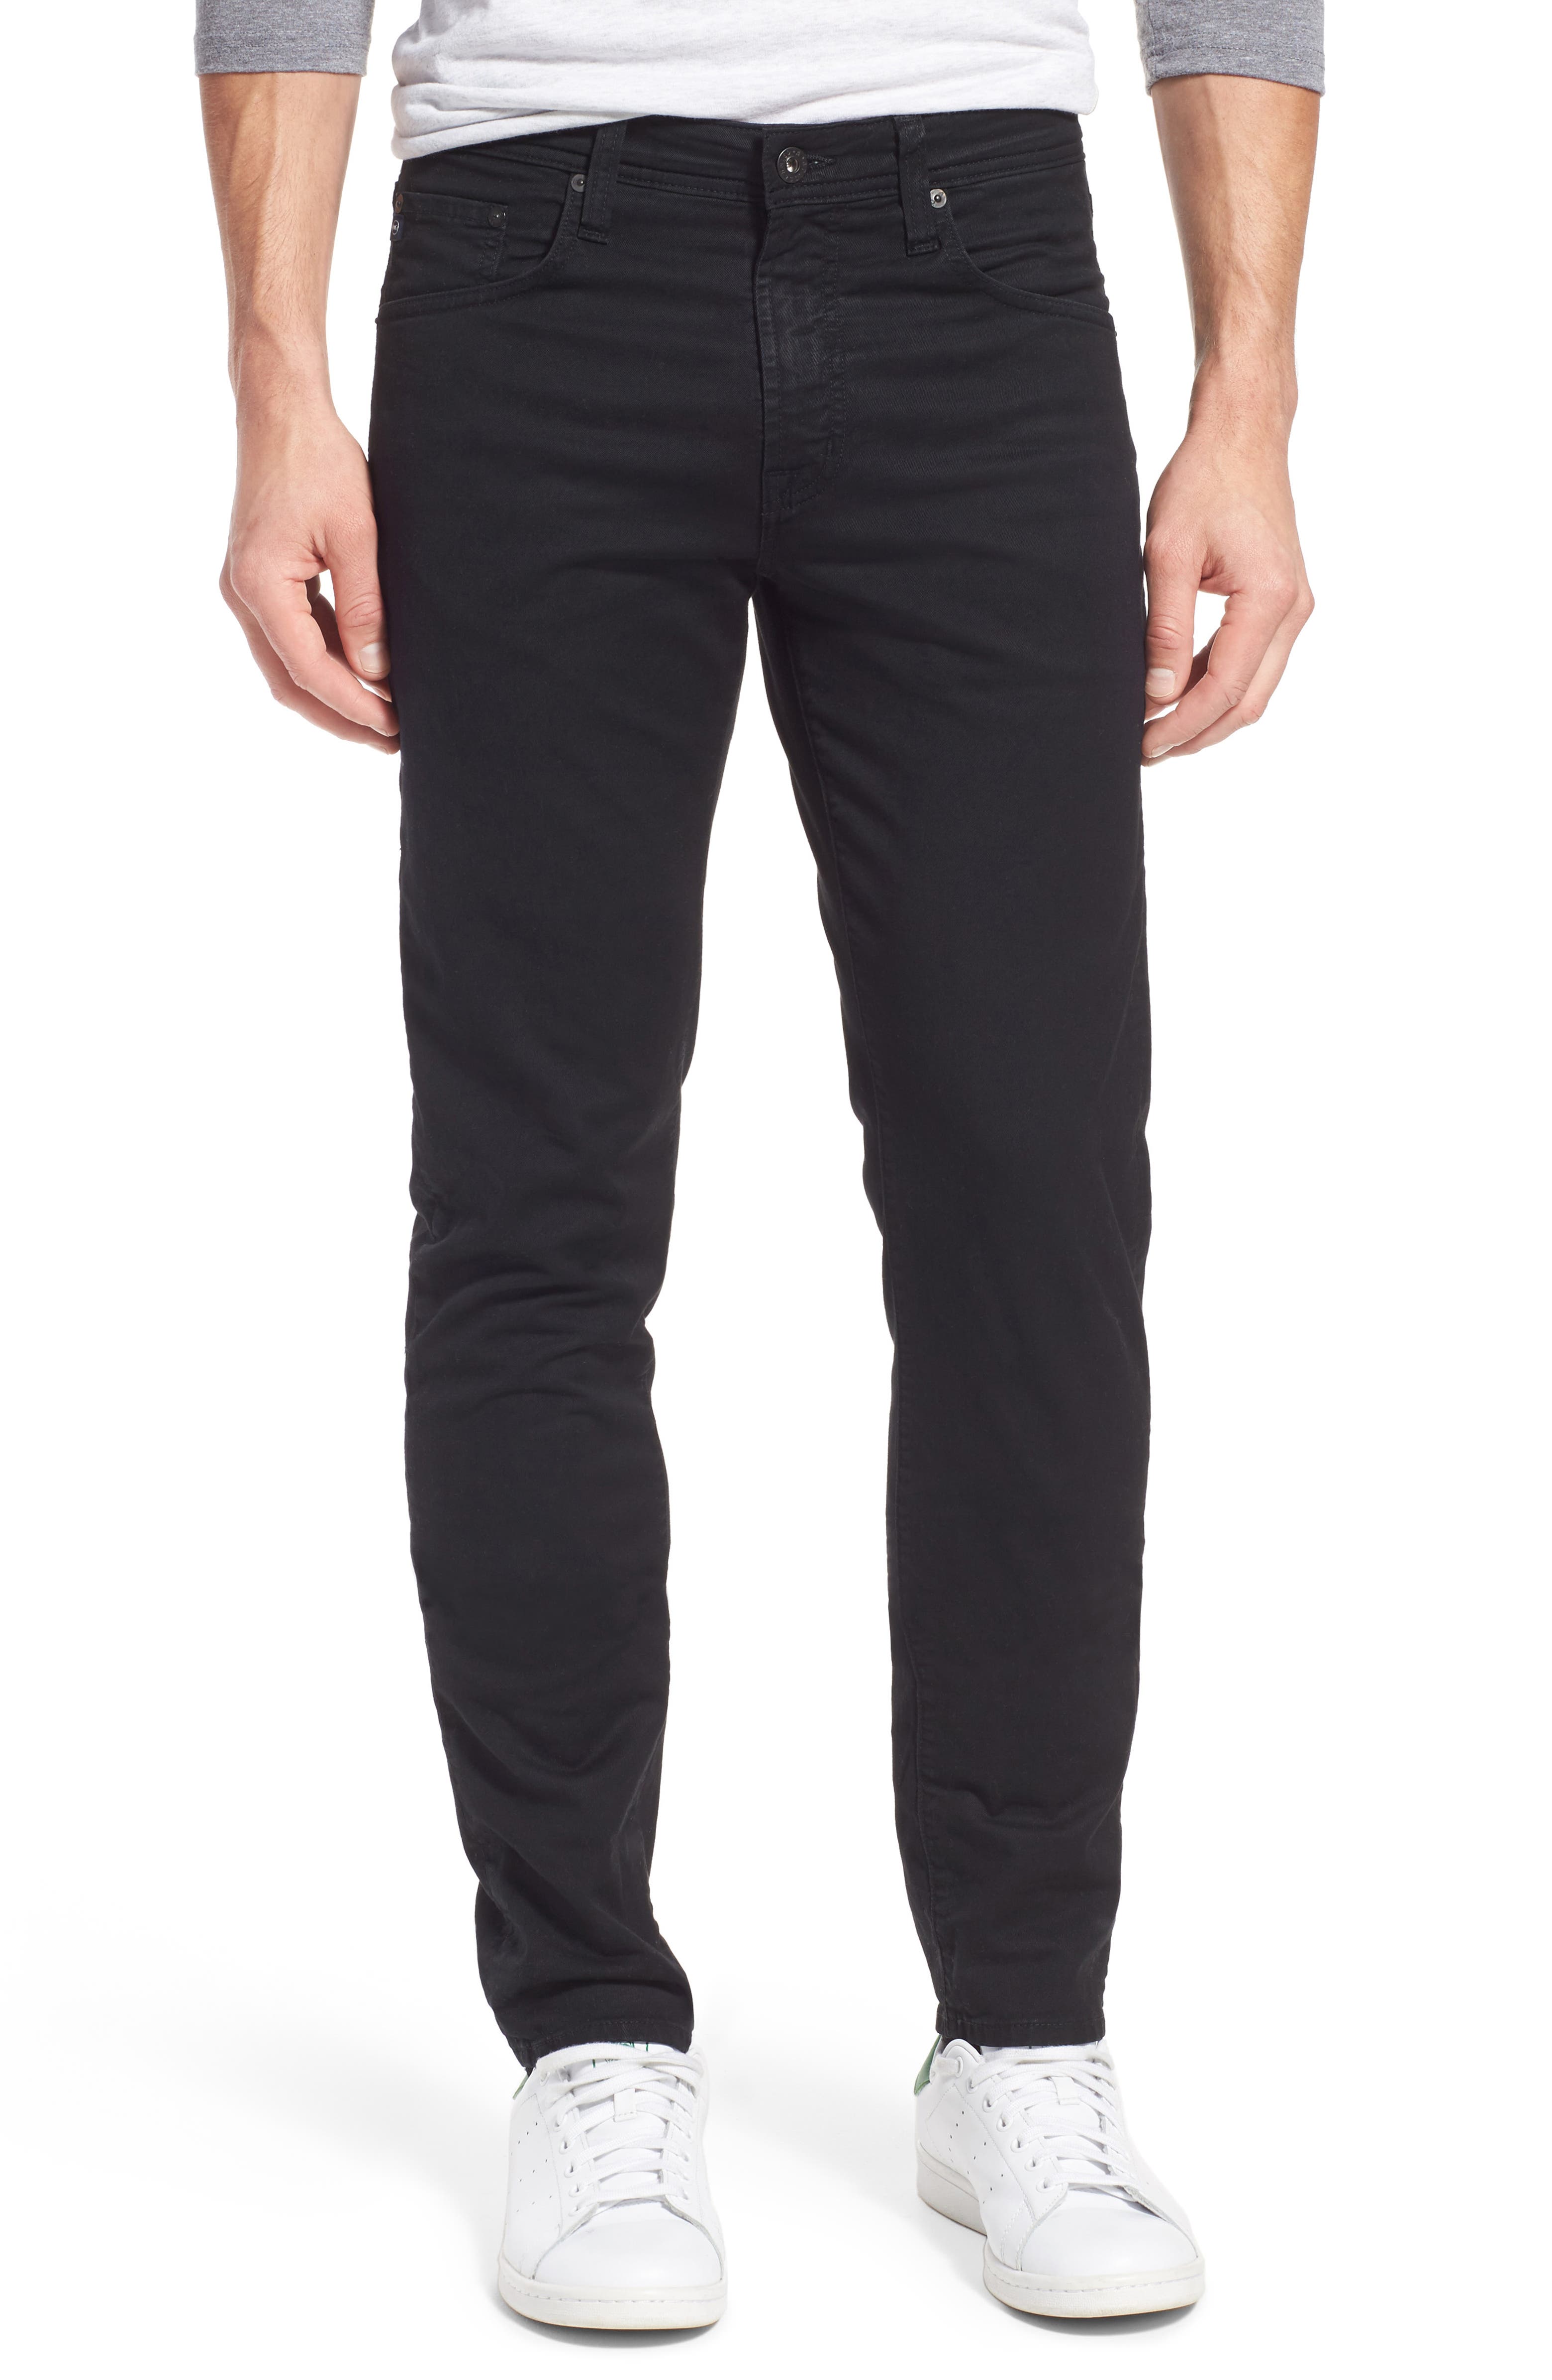 AG 'Nomad' Skinny Fit Stretch Twill Pants | Nordstrom